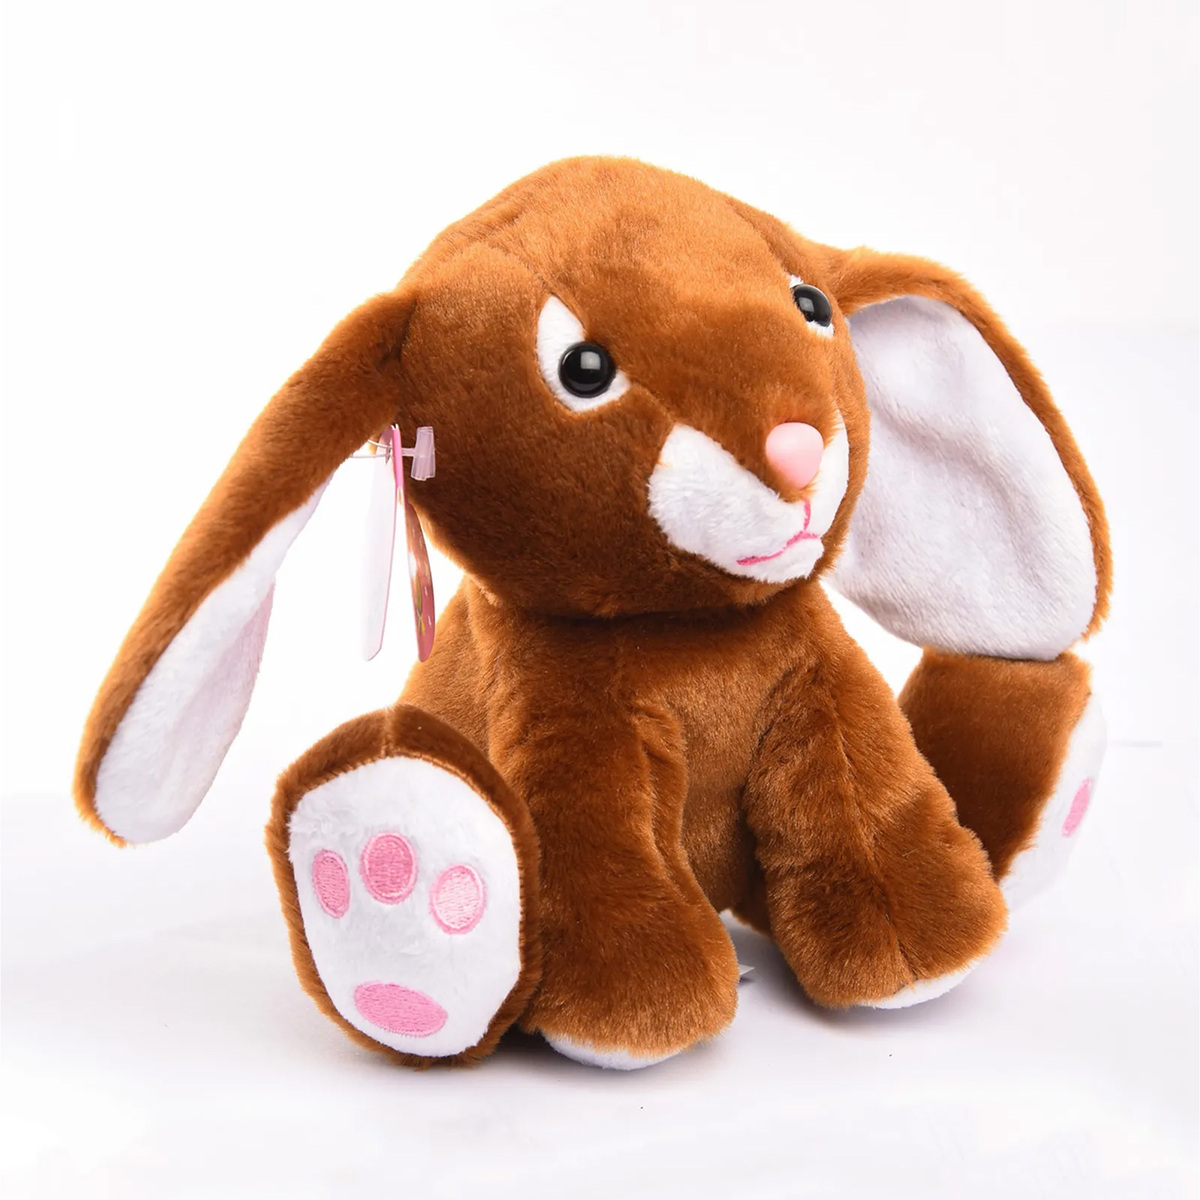 Cuddly Lovables Bunny Plush Toy, 15 cm, Brown, CL47